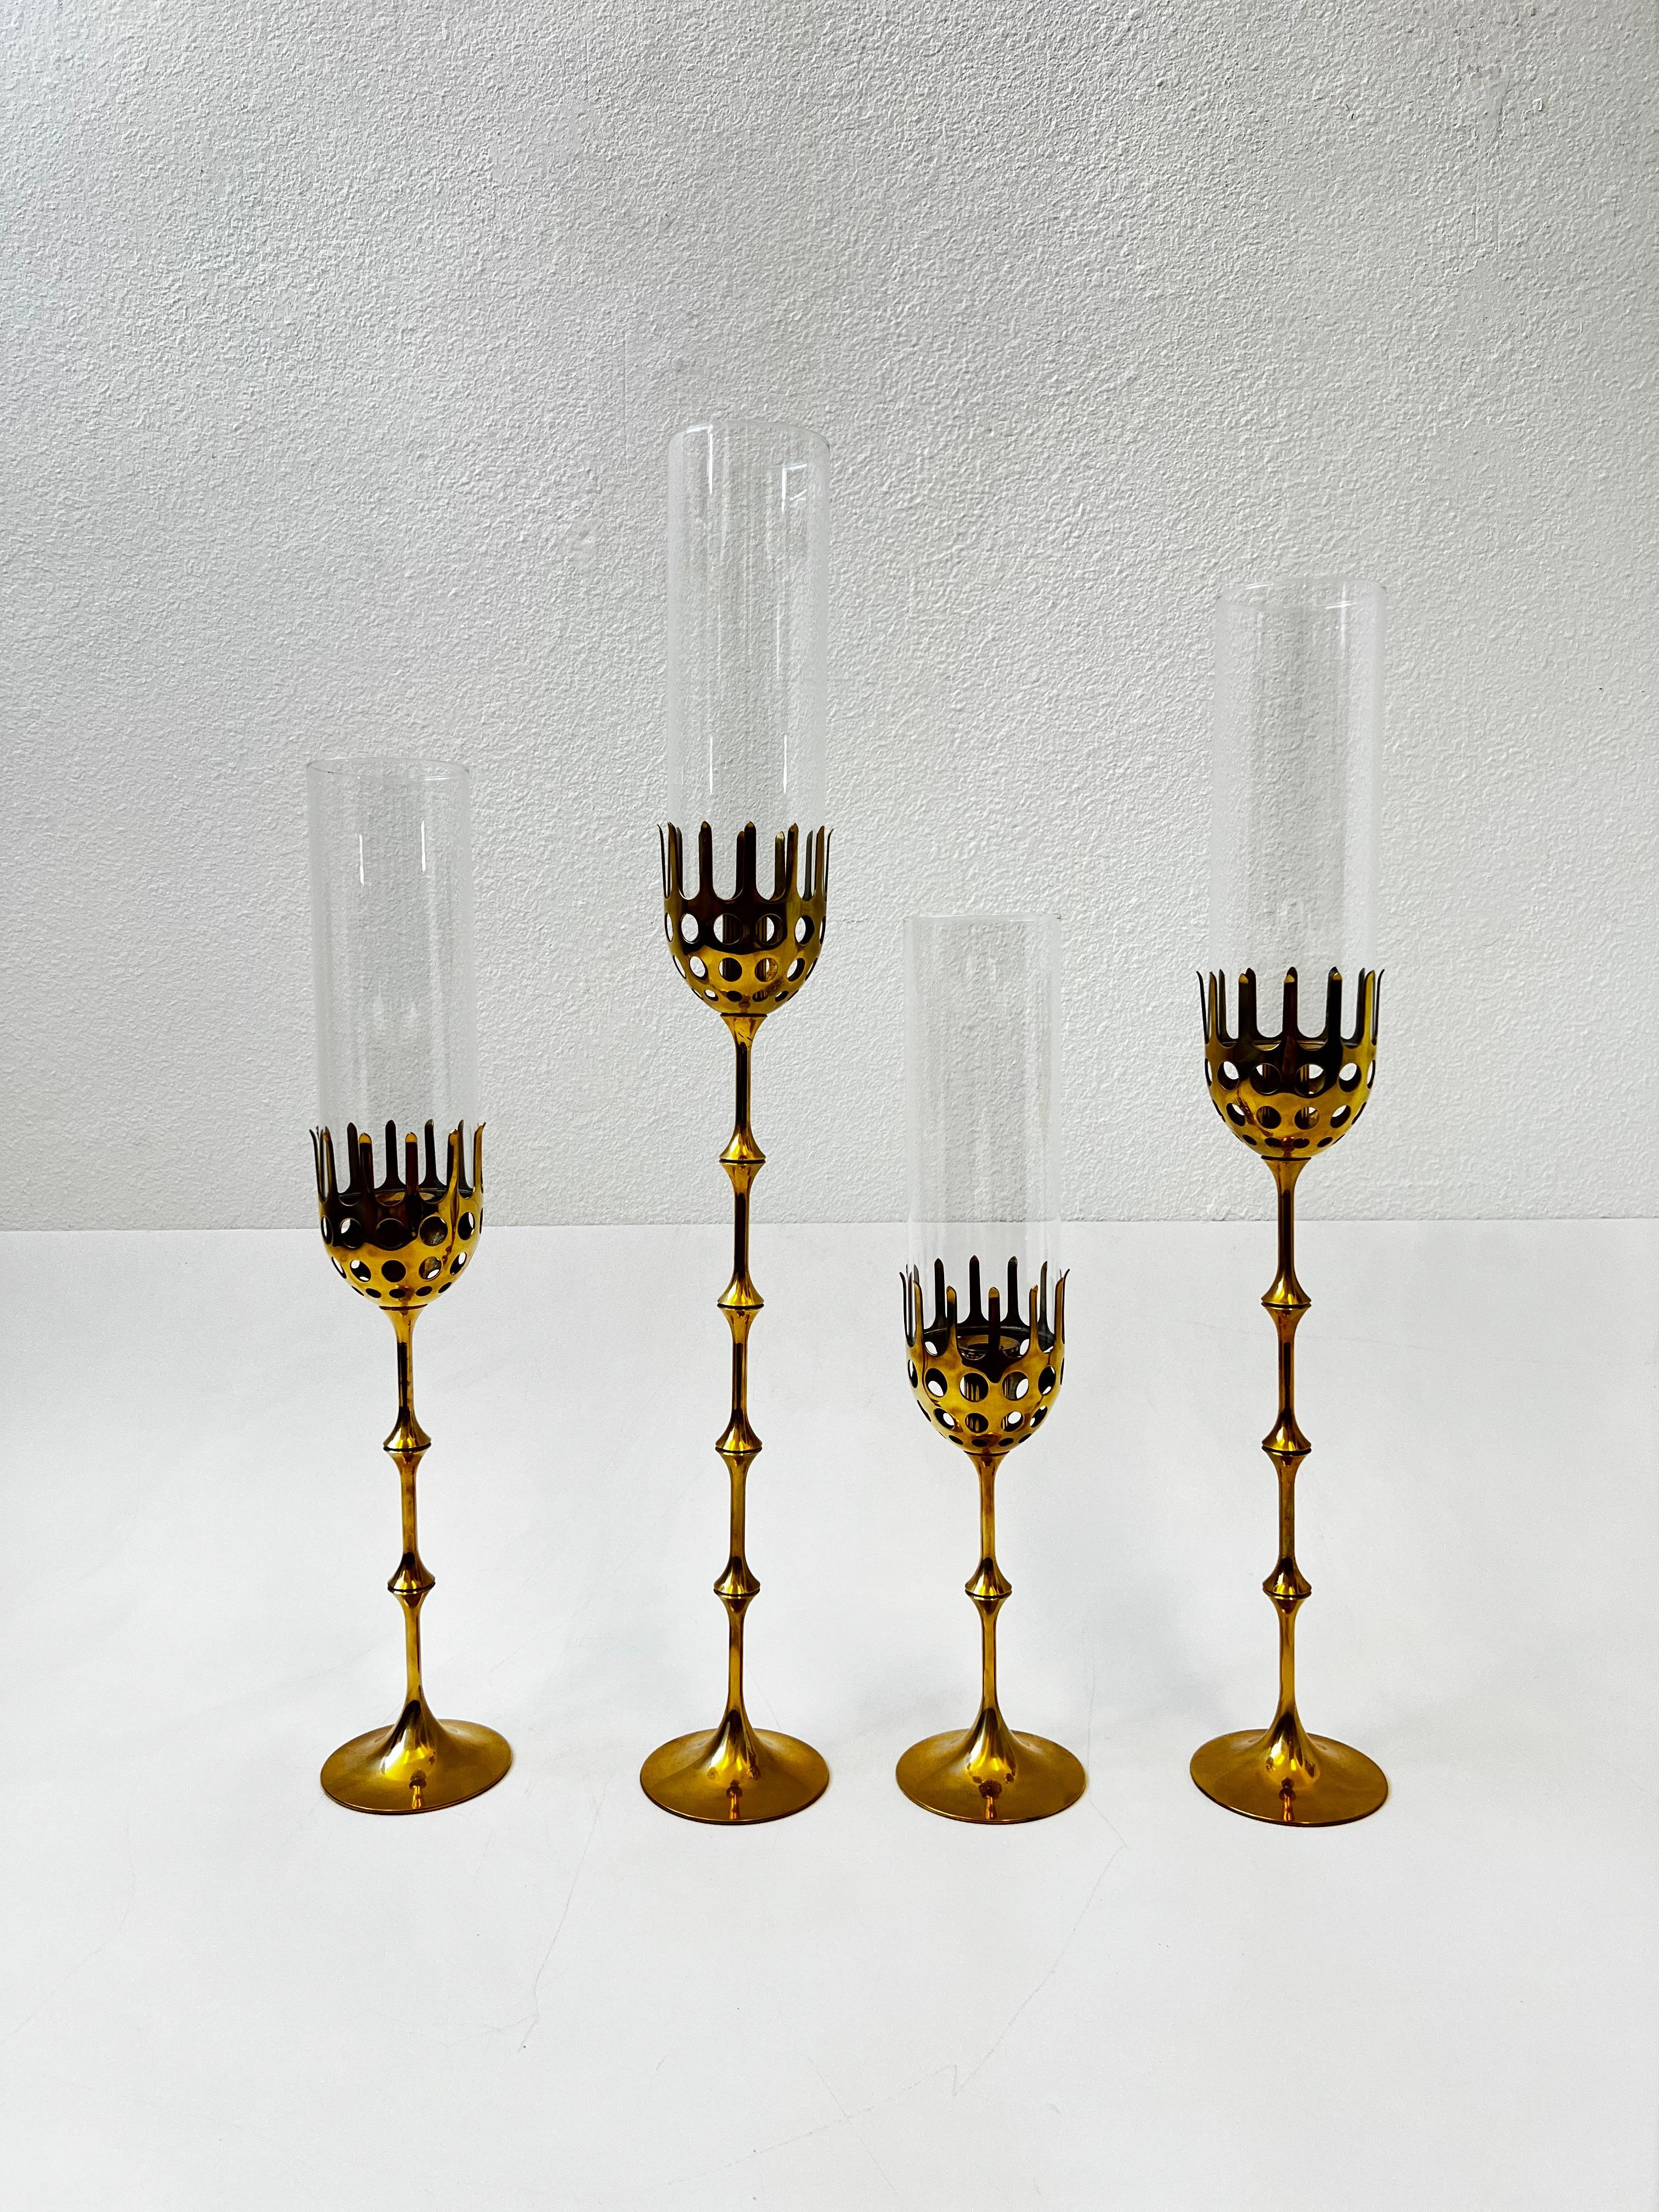 Beautiful set of four hurricane candle holders designed by renowned Danish designer Bijorn Wiinblad. 
Constructed of solid brass and glass. In original vintage condition, they show minor wear consistent with age. 
The brass is not lacquered. They